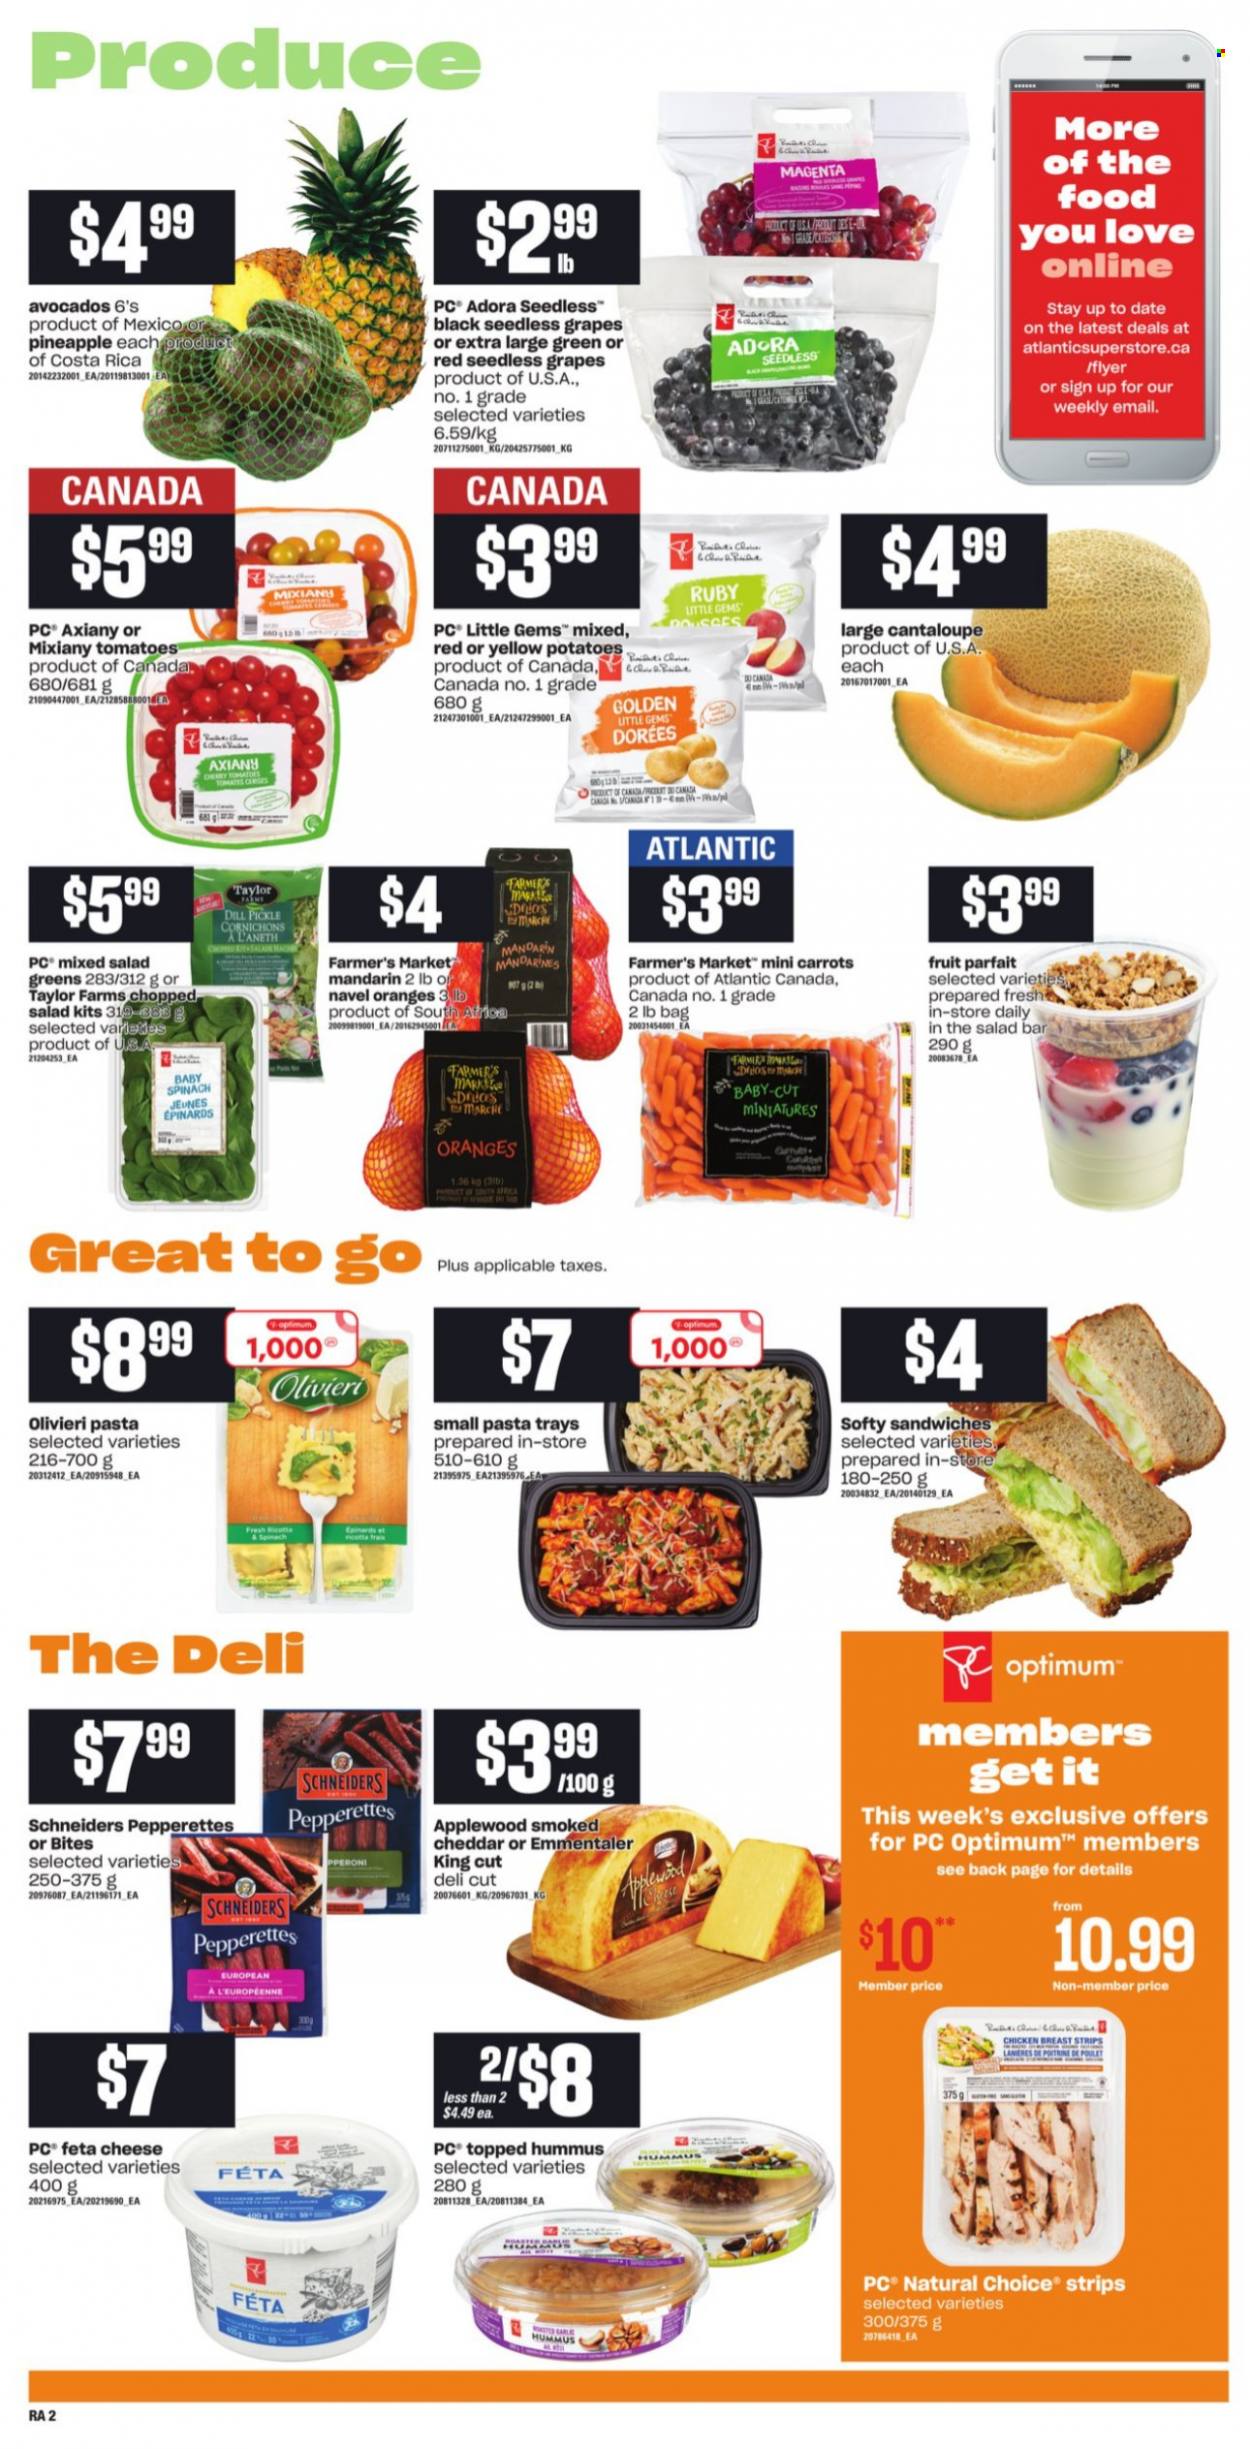 thumbnail - Atlantic Superstore Flyer - October 14, 2021 - October 20, 2021 - Sales products - cantaloupe, carrots, spinach, tomatoes, potatoes, salad, chopped salad, avocado, grapes, mandarines, seedless grapes, navel oranges, sandwich, pasta, hummus, cheddar, cheese, feta, strips, dill pickle, dill, chicken, Optimum, ricotta, salad greens, oranges. Page 3.